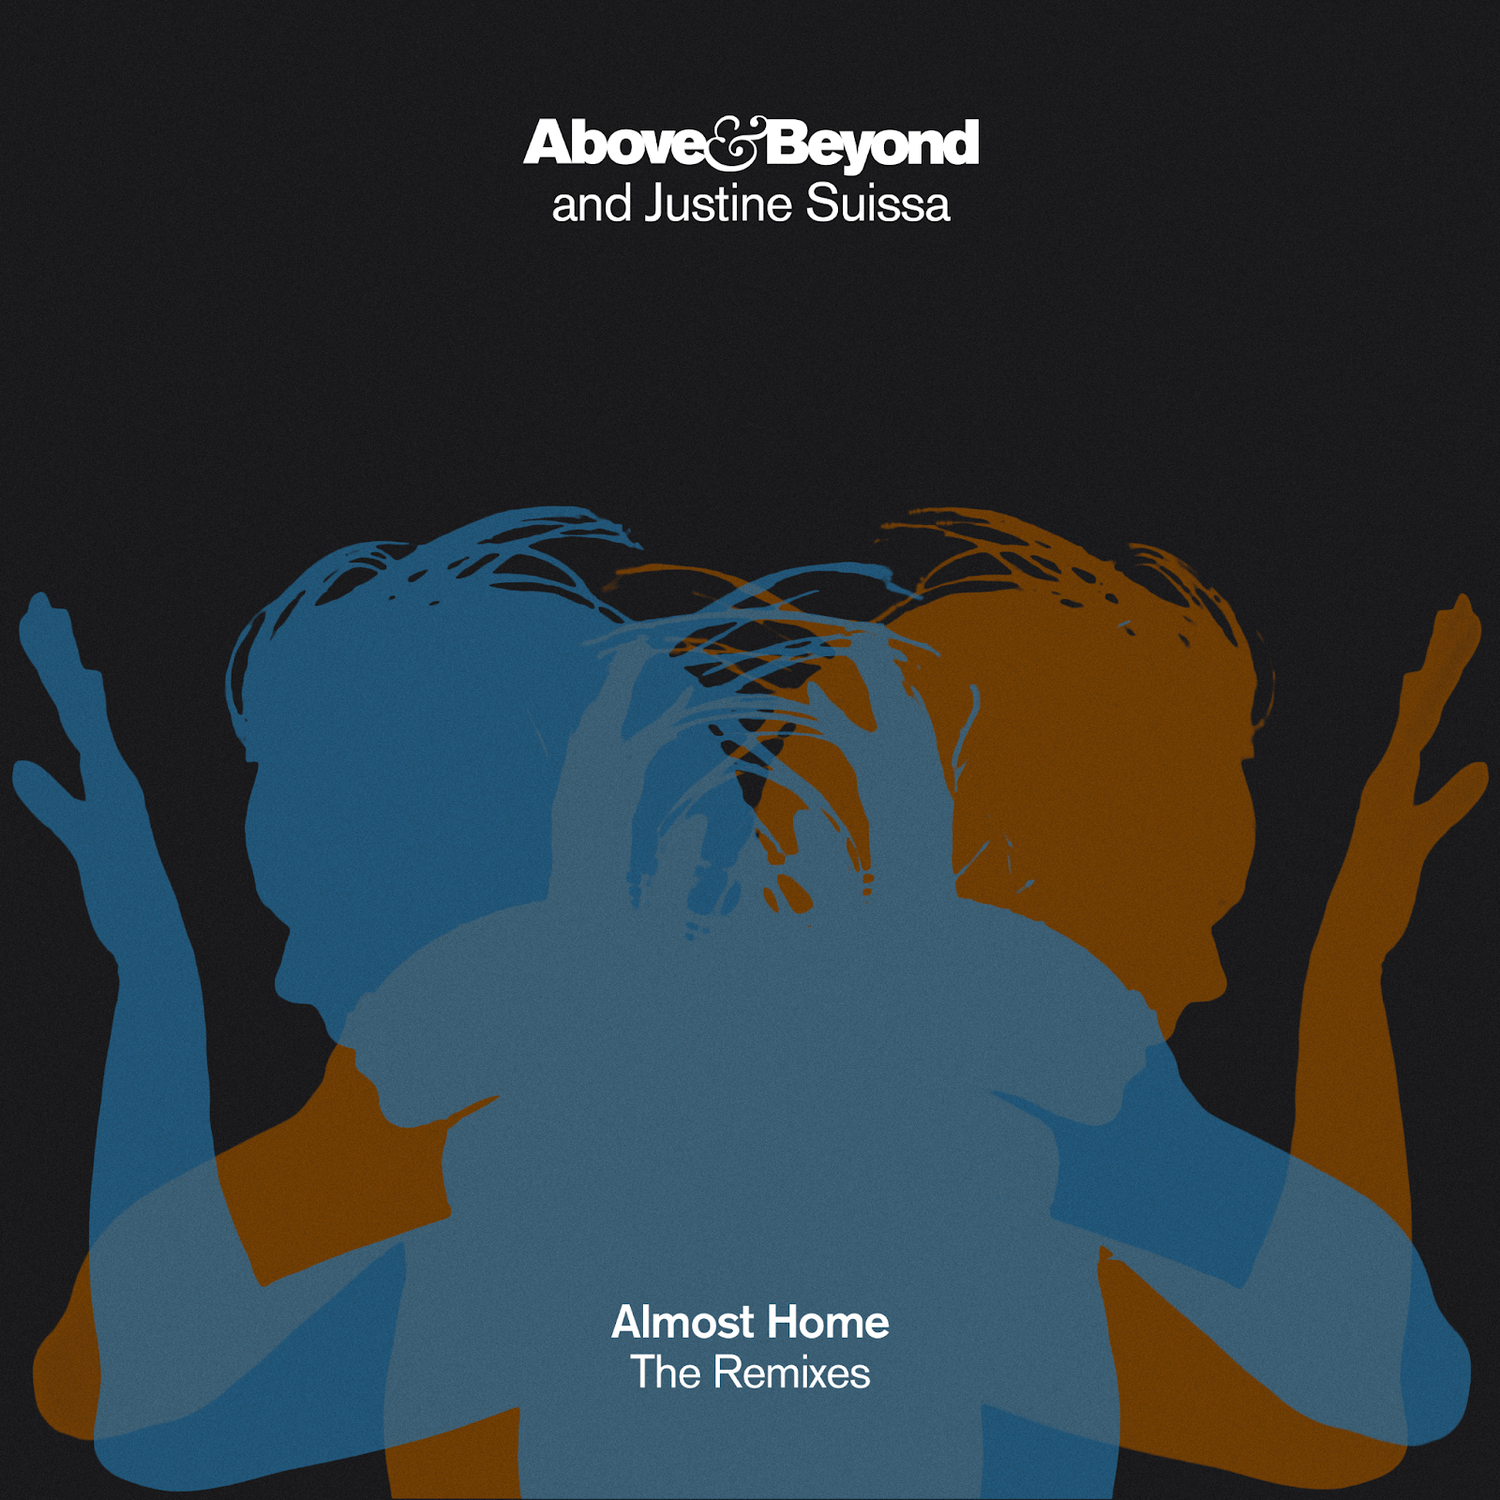 Above & Beyond and Justine Suissa